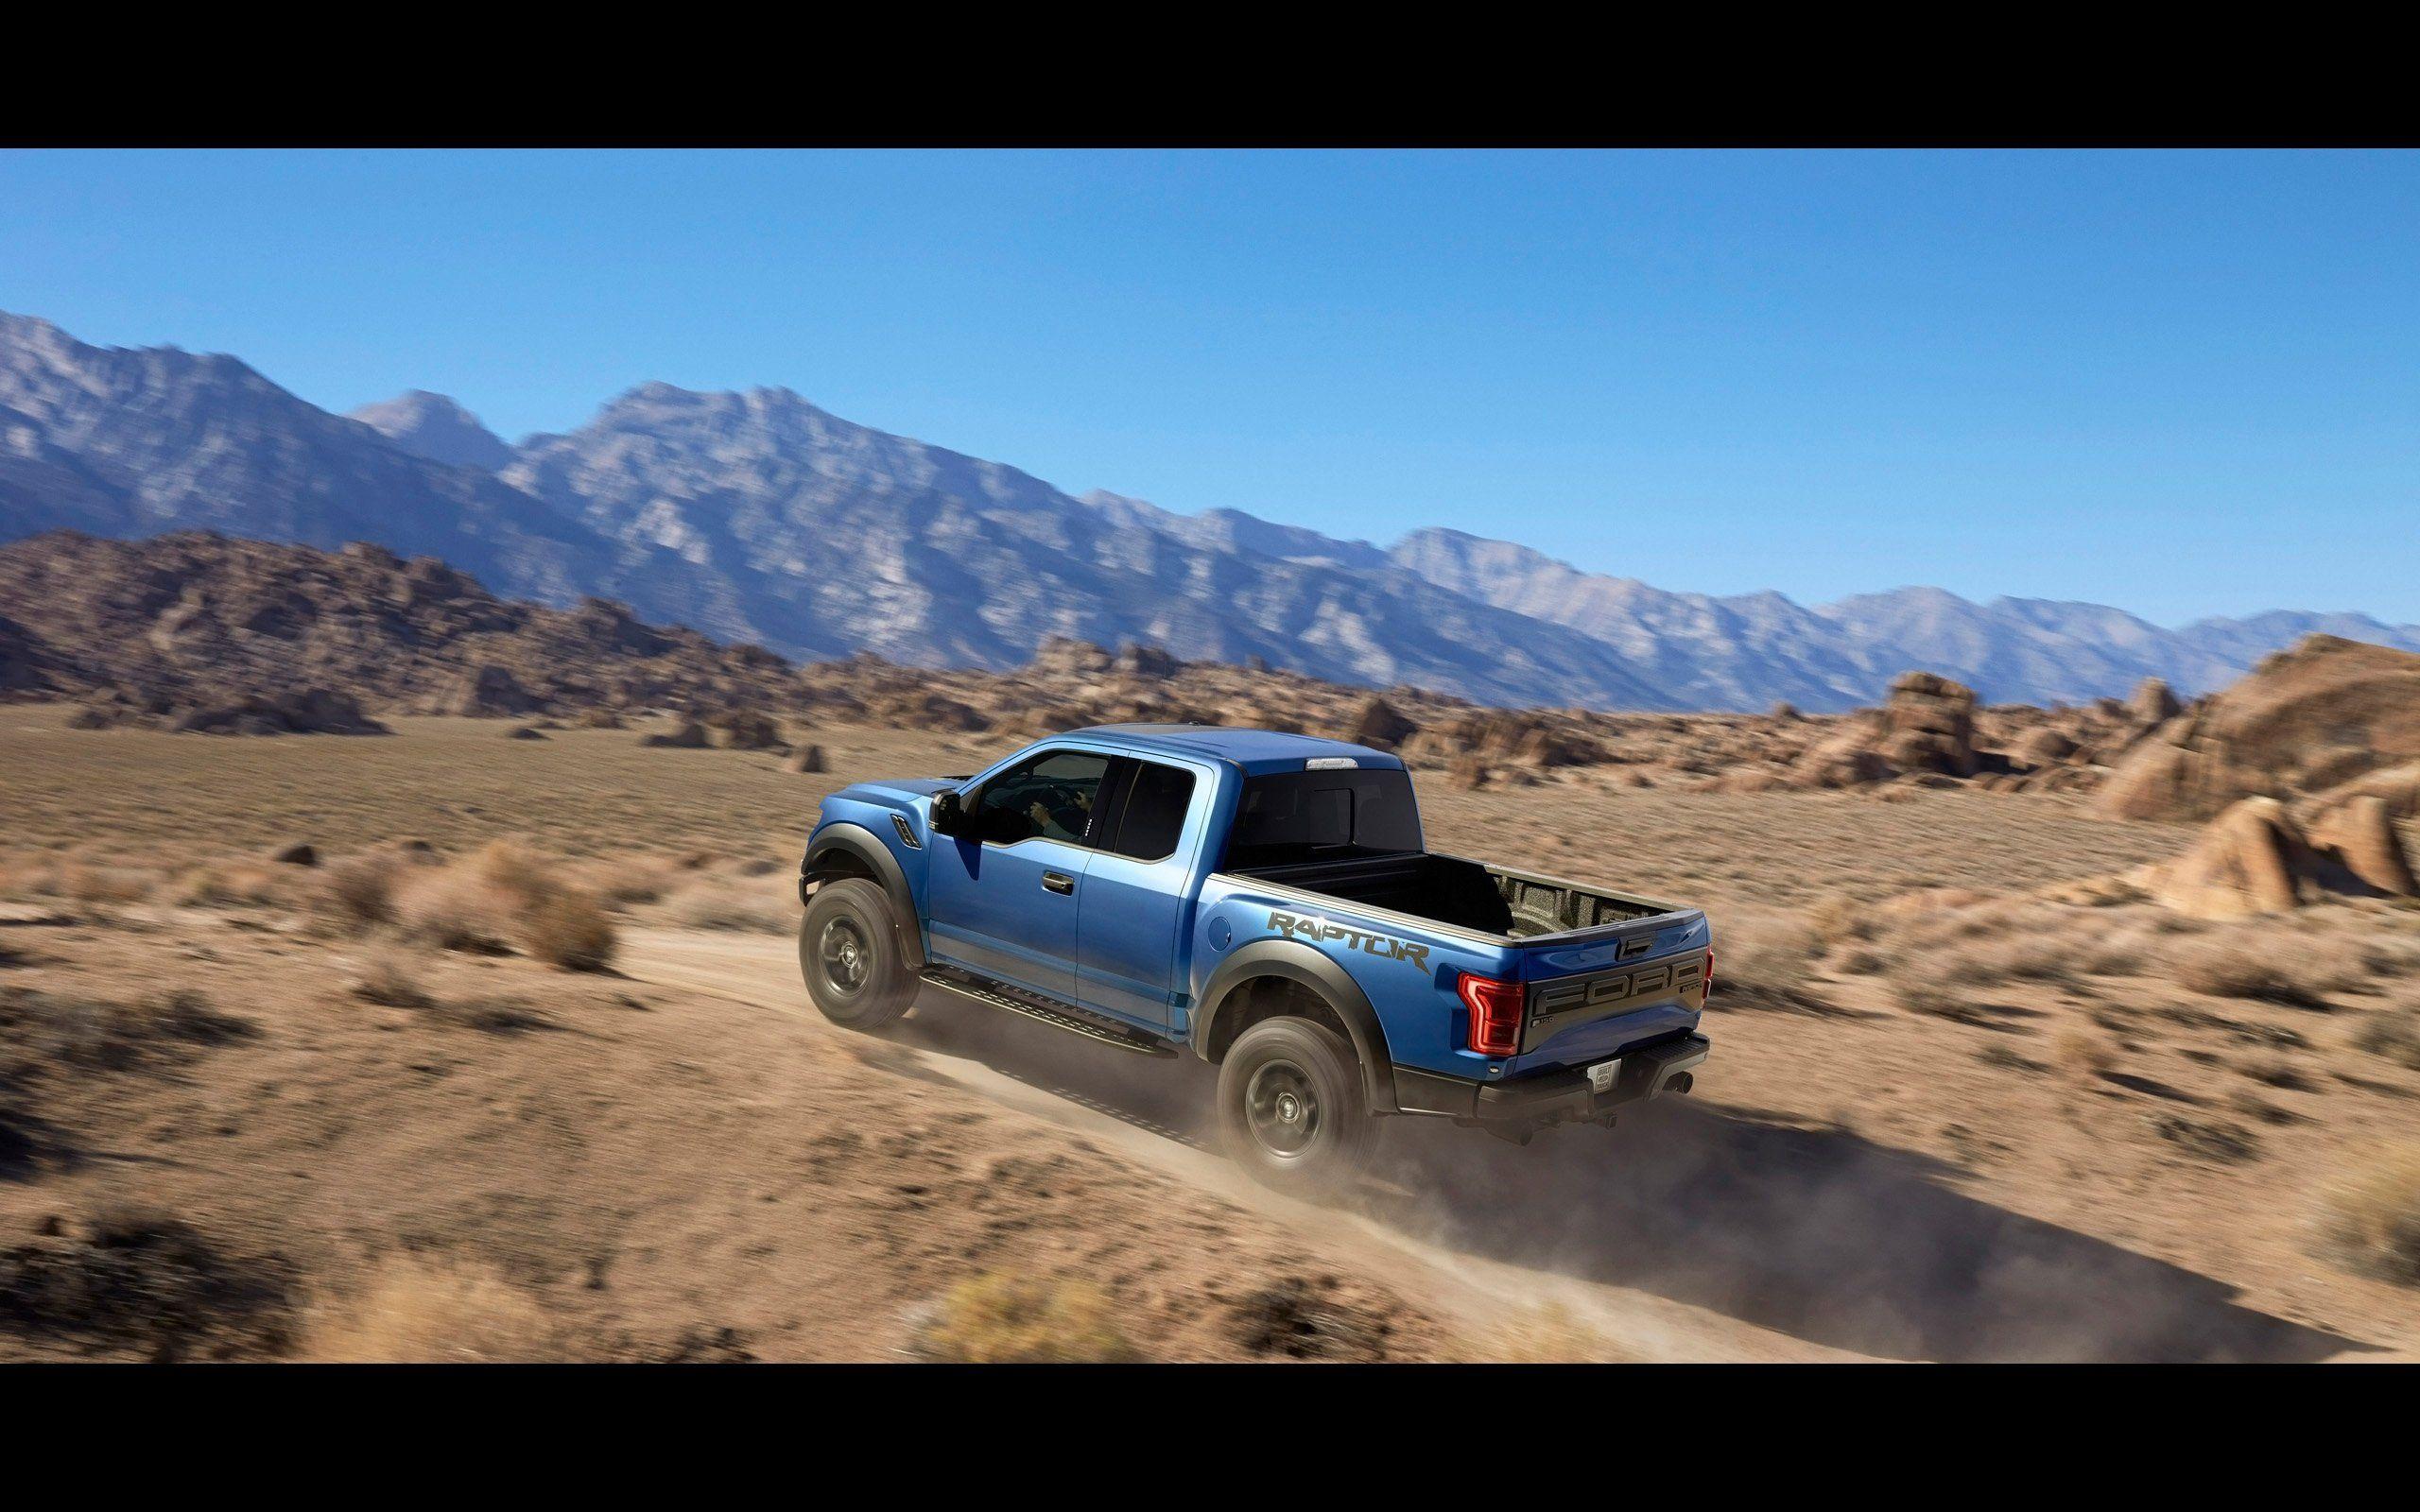 Ford F150 Raptor 2017 Truck Pickup Cars Wallpapers 1920x1280 583922